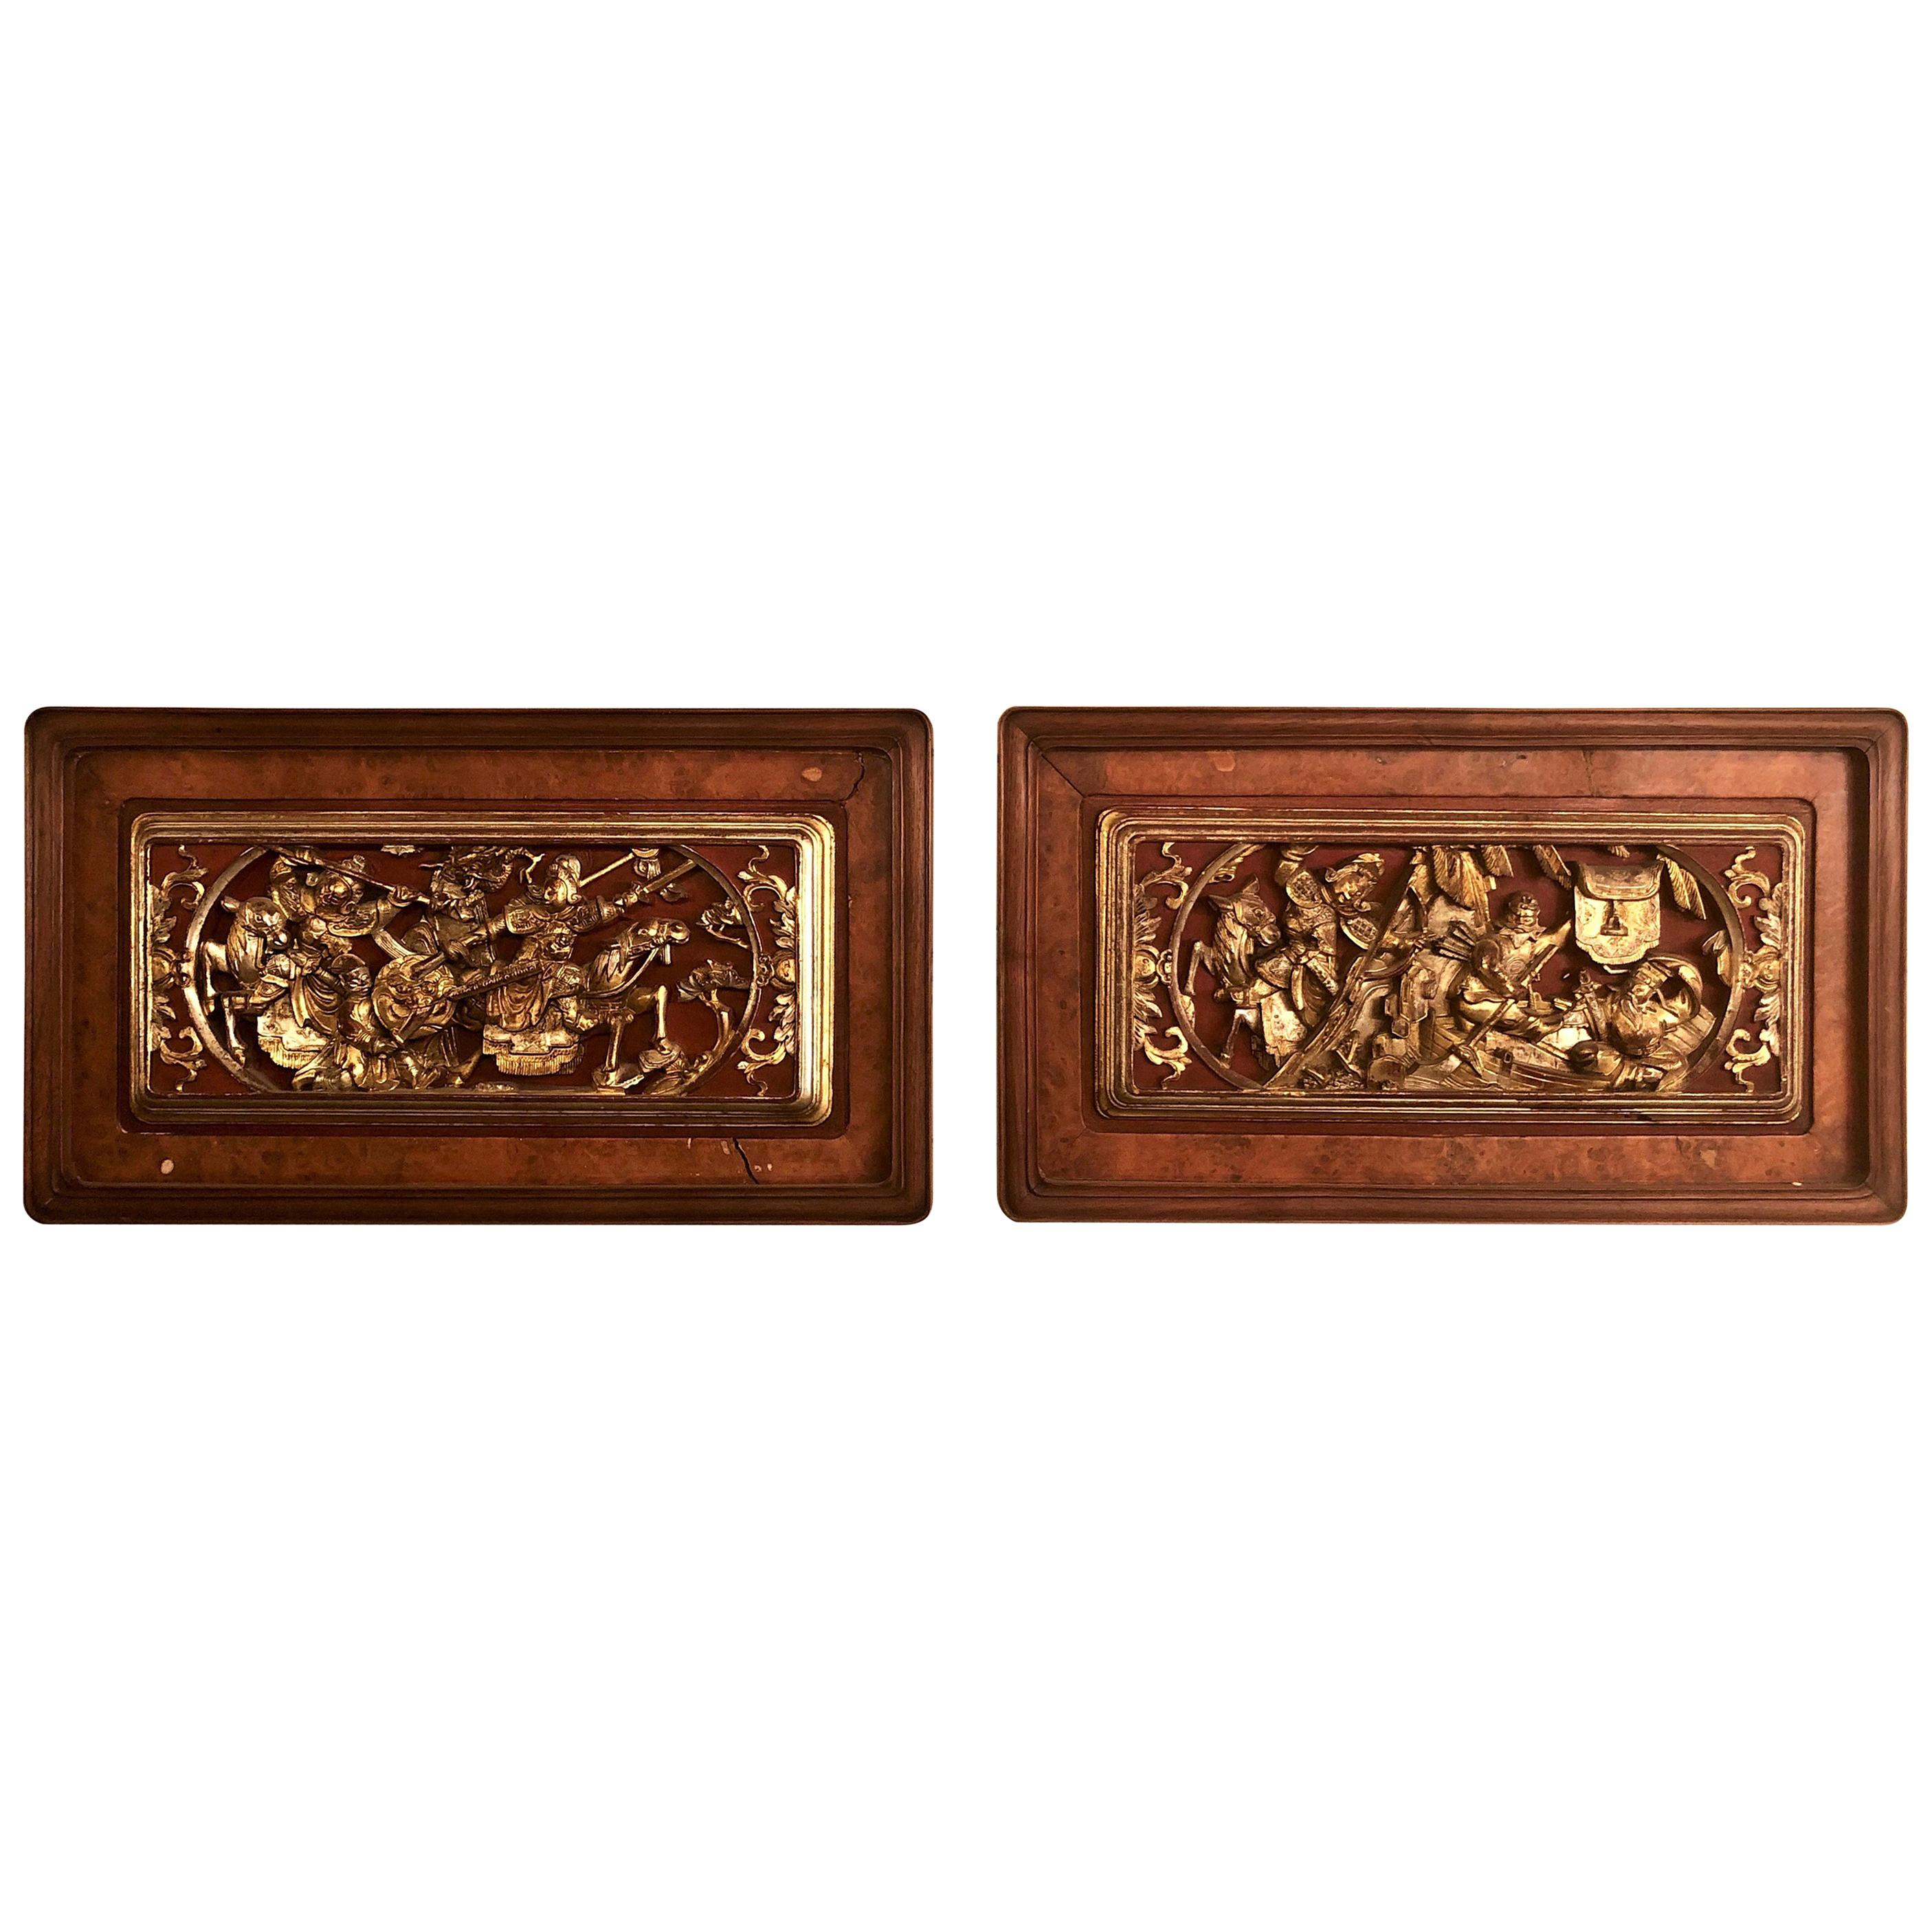 Pair of Antique Panels from a Decorative Screen, Probably Siamese